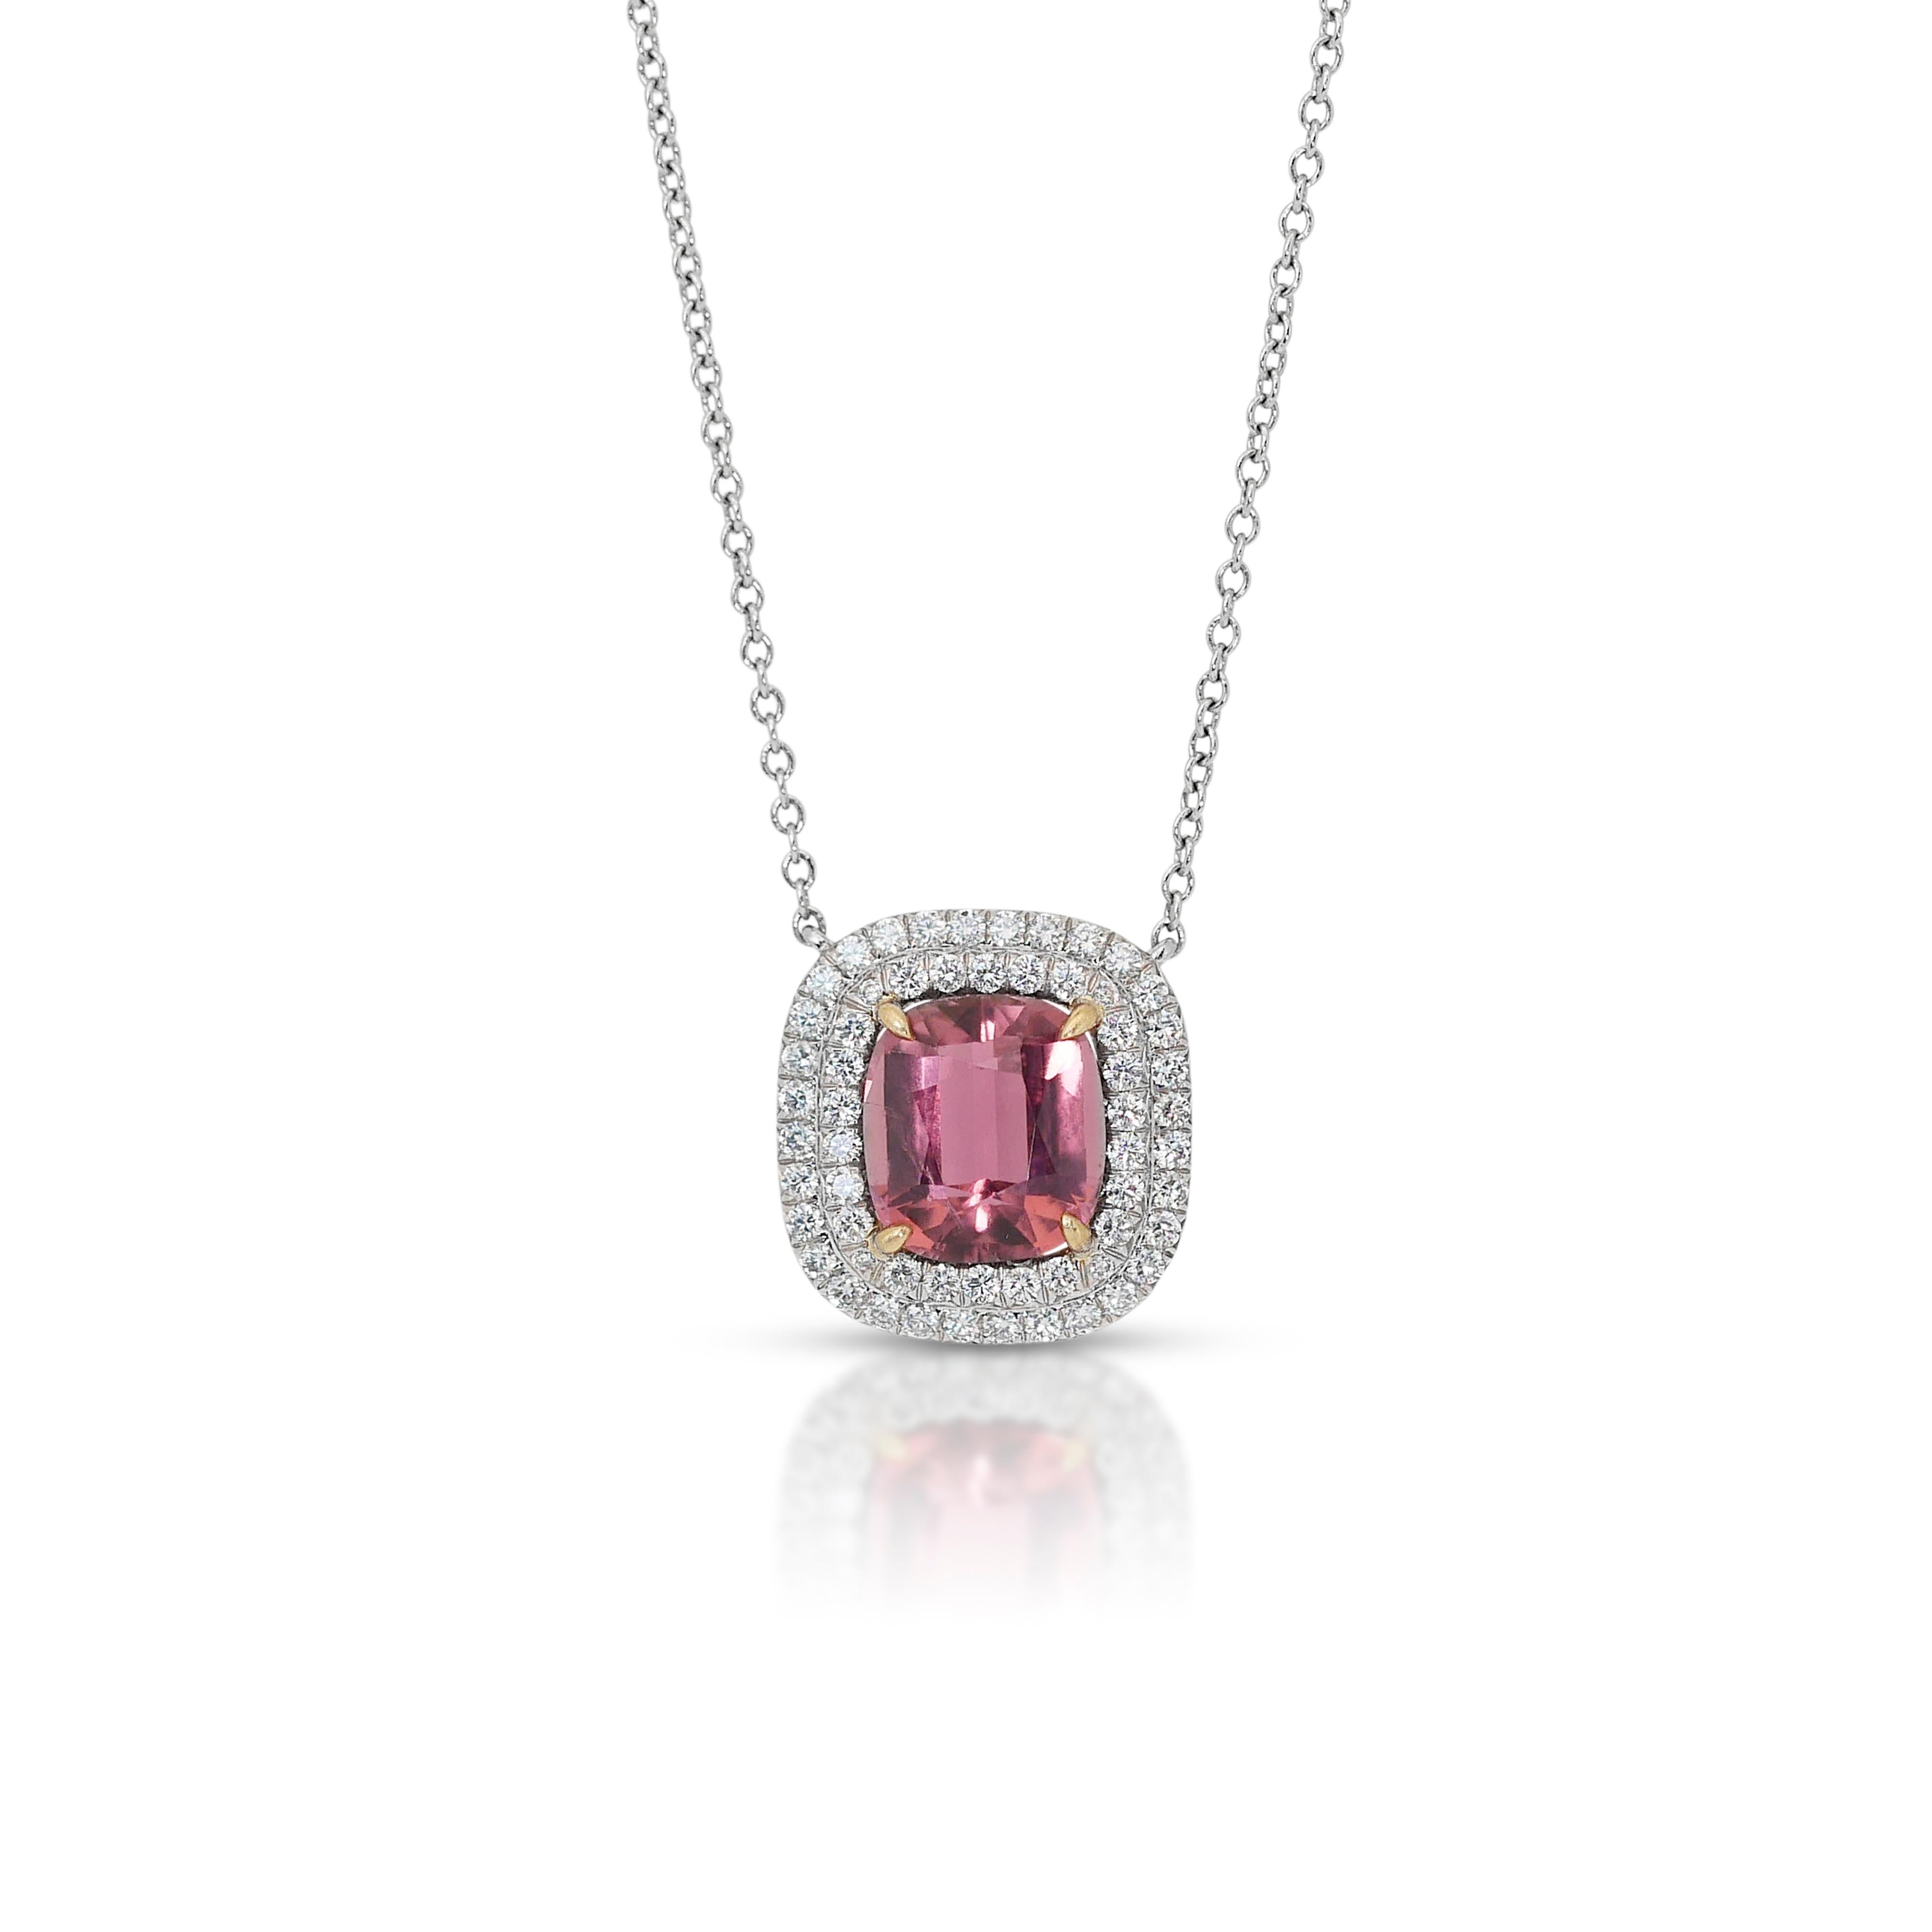 Alluring 2.70ct Tourmaline and Diamonds Halo Necklace in 18k White & Yellow Gold - IGI Certified

Crafted from a sophisticated blend of 18k white and yellow gold, this stunning halo necklace features a central 2.00-carat cushion-cut tourmaline,